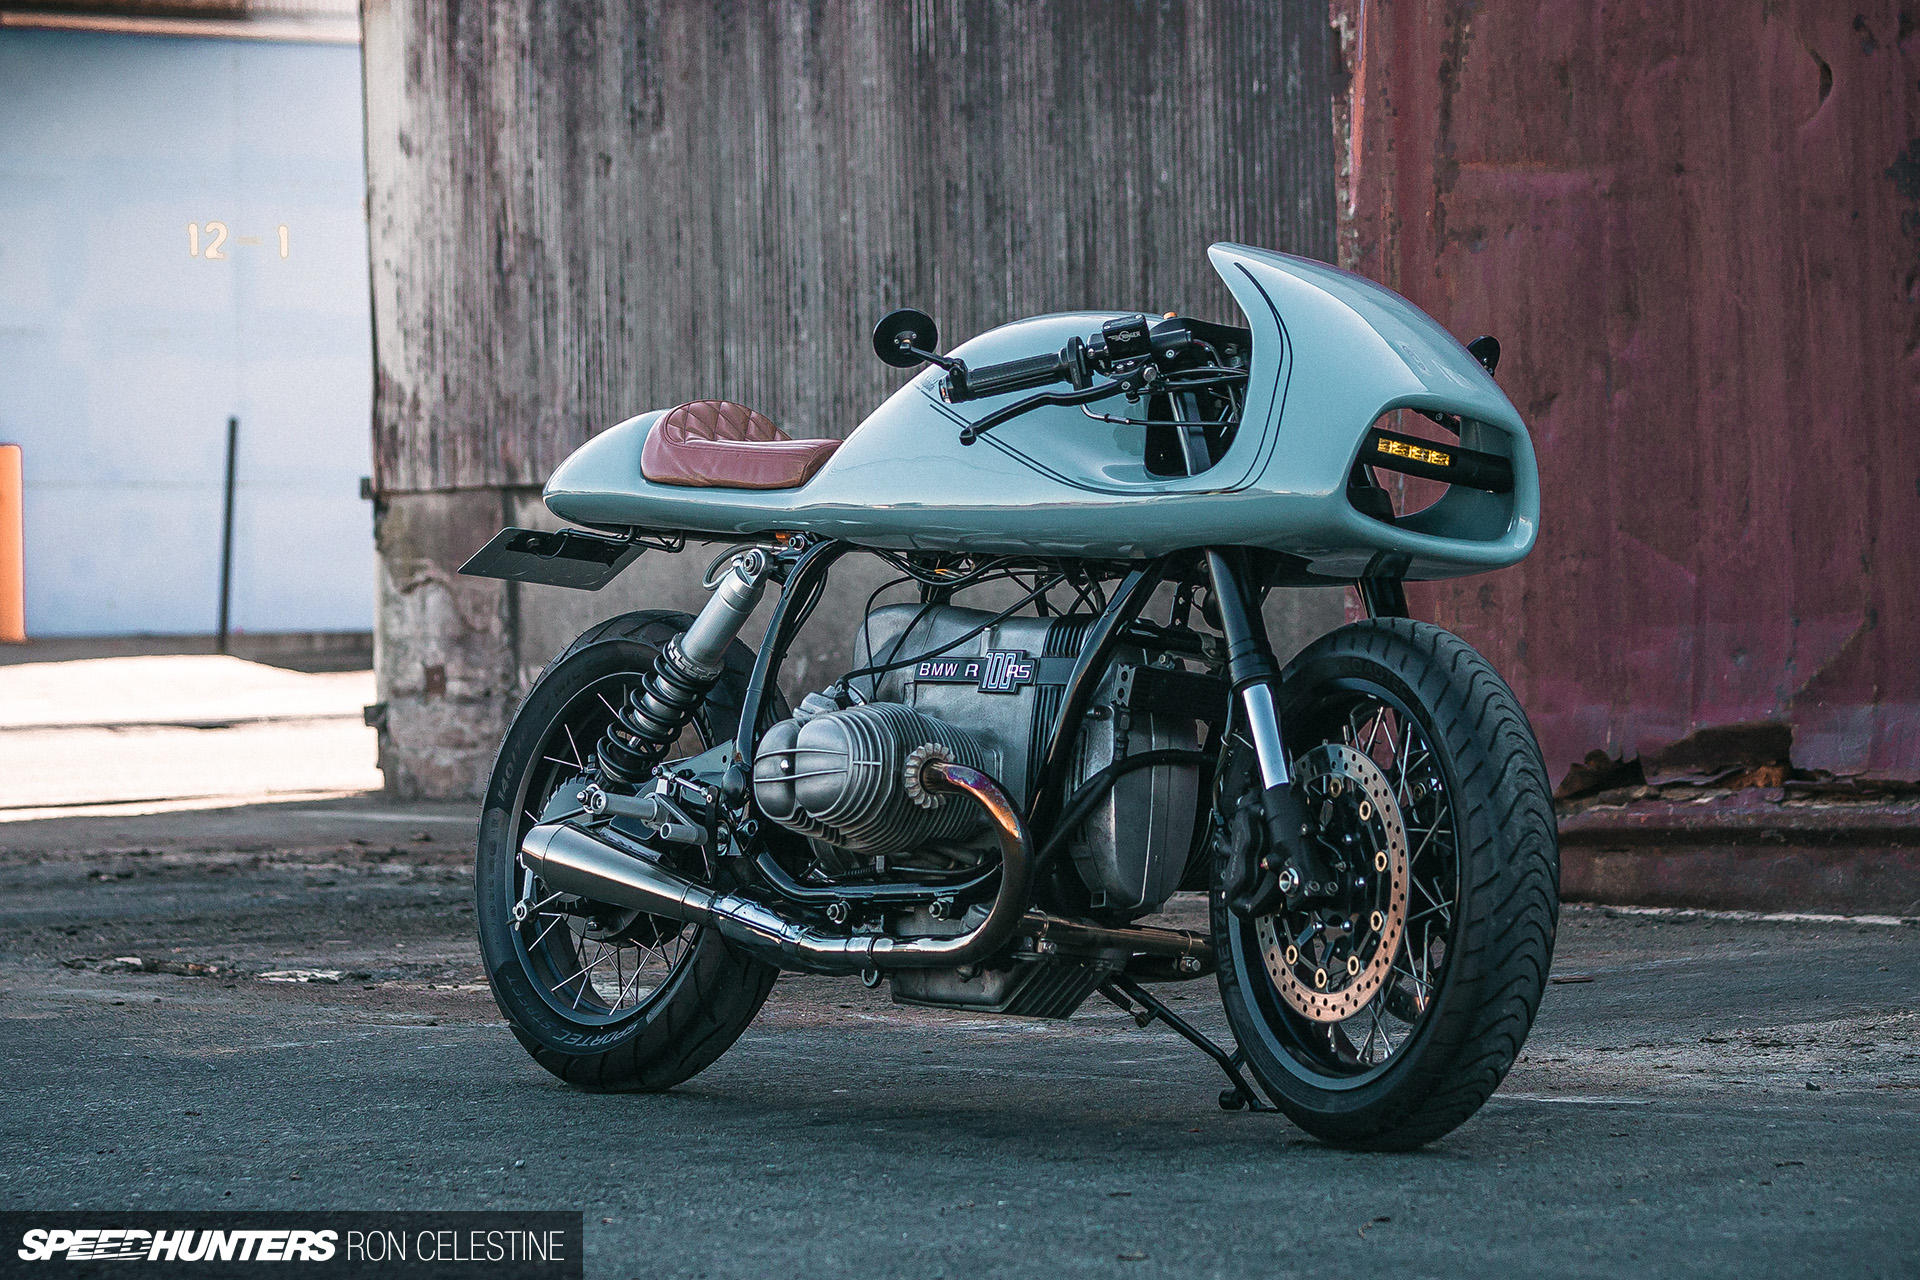 Design Without Compromise L Intrepide Cafe Racer Speedhunters